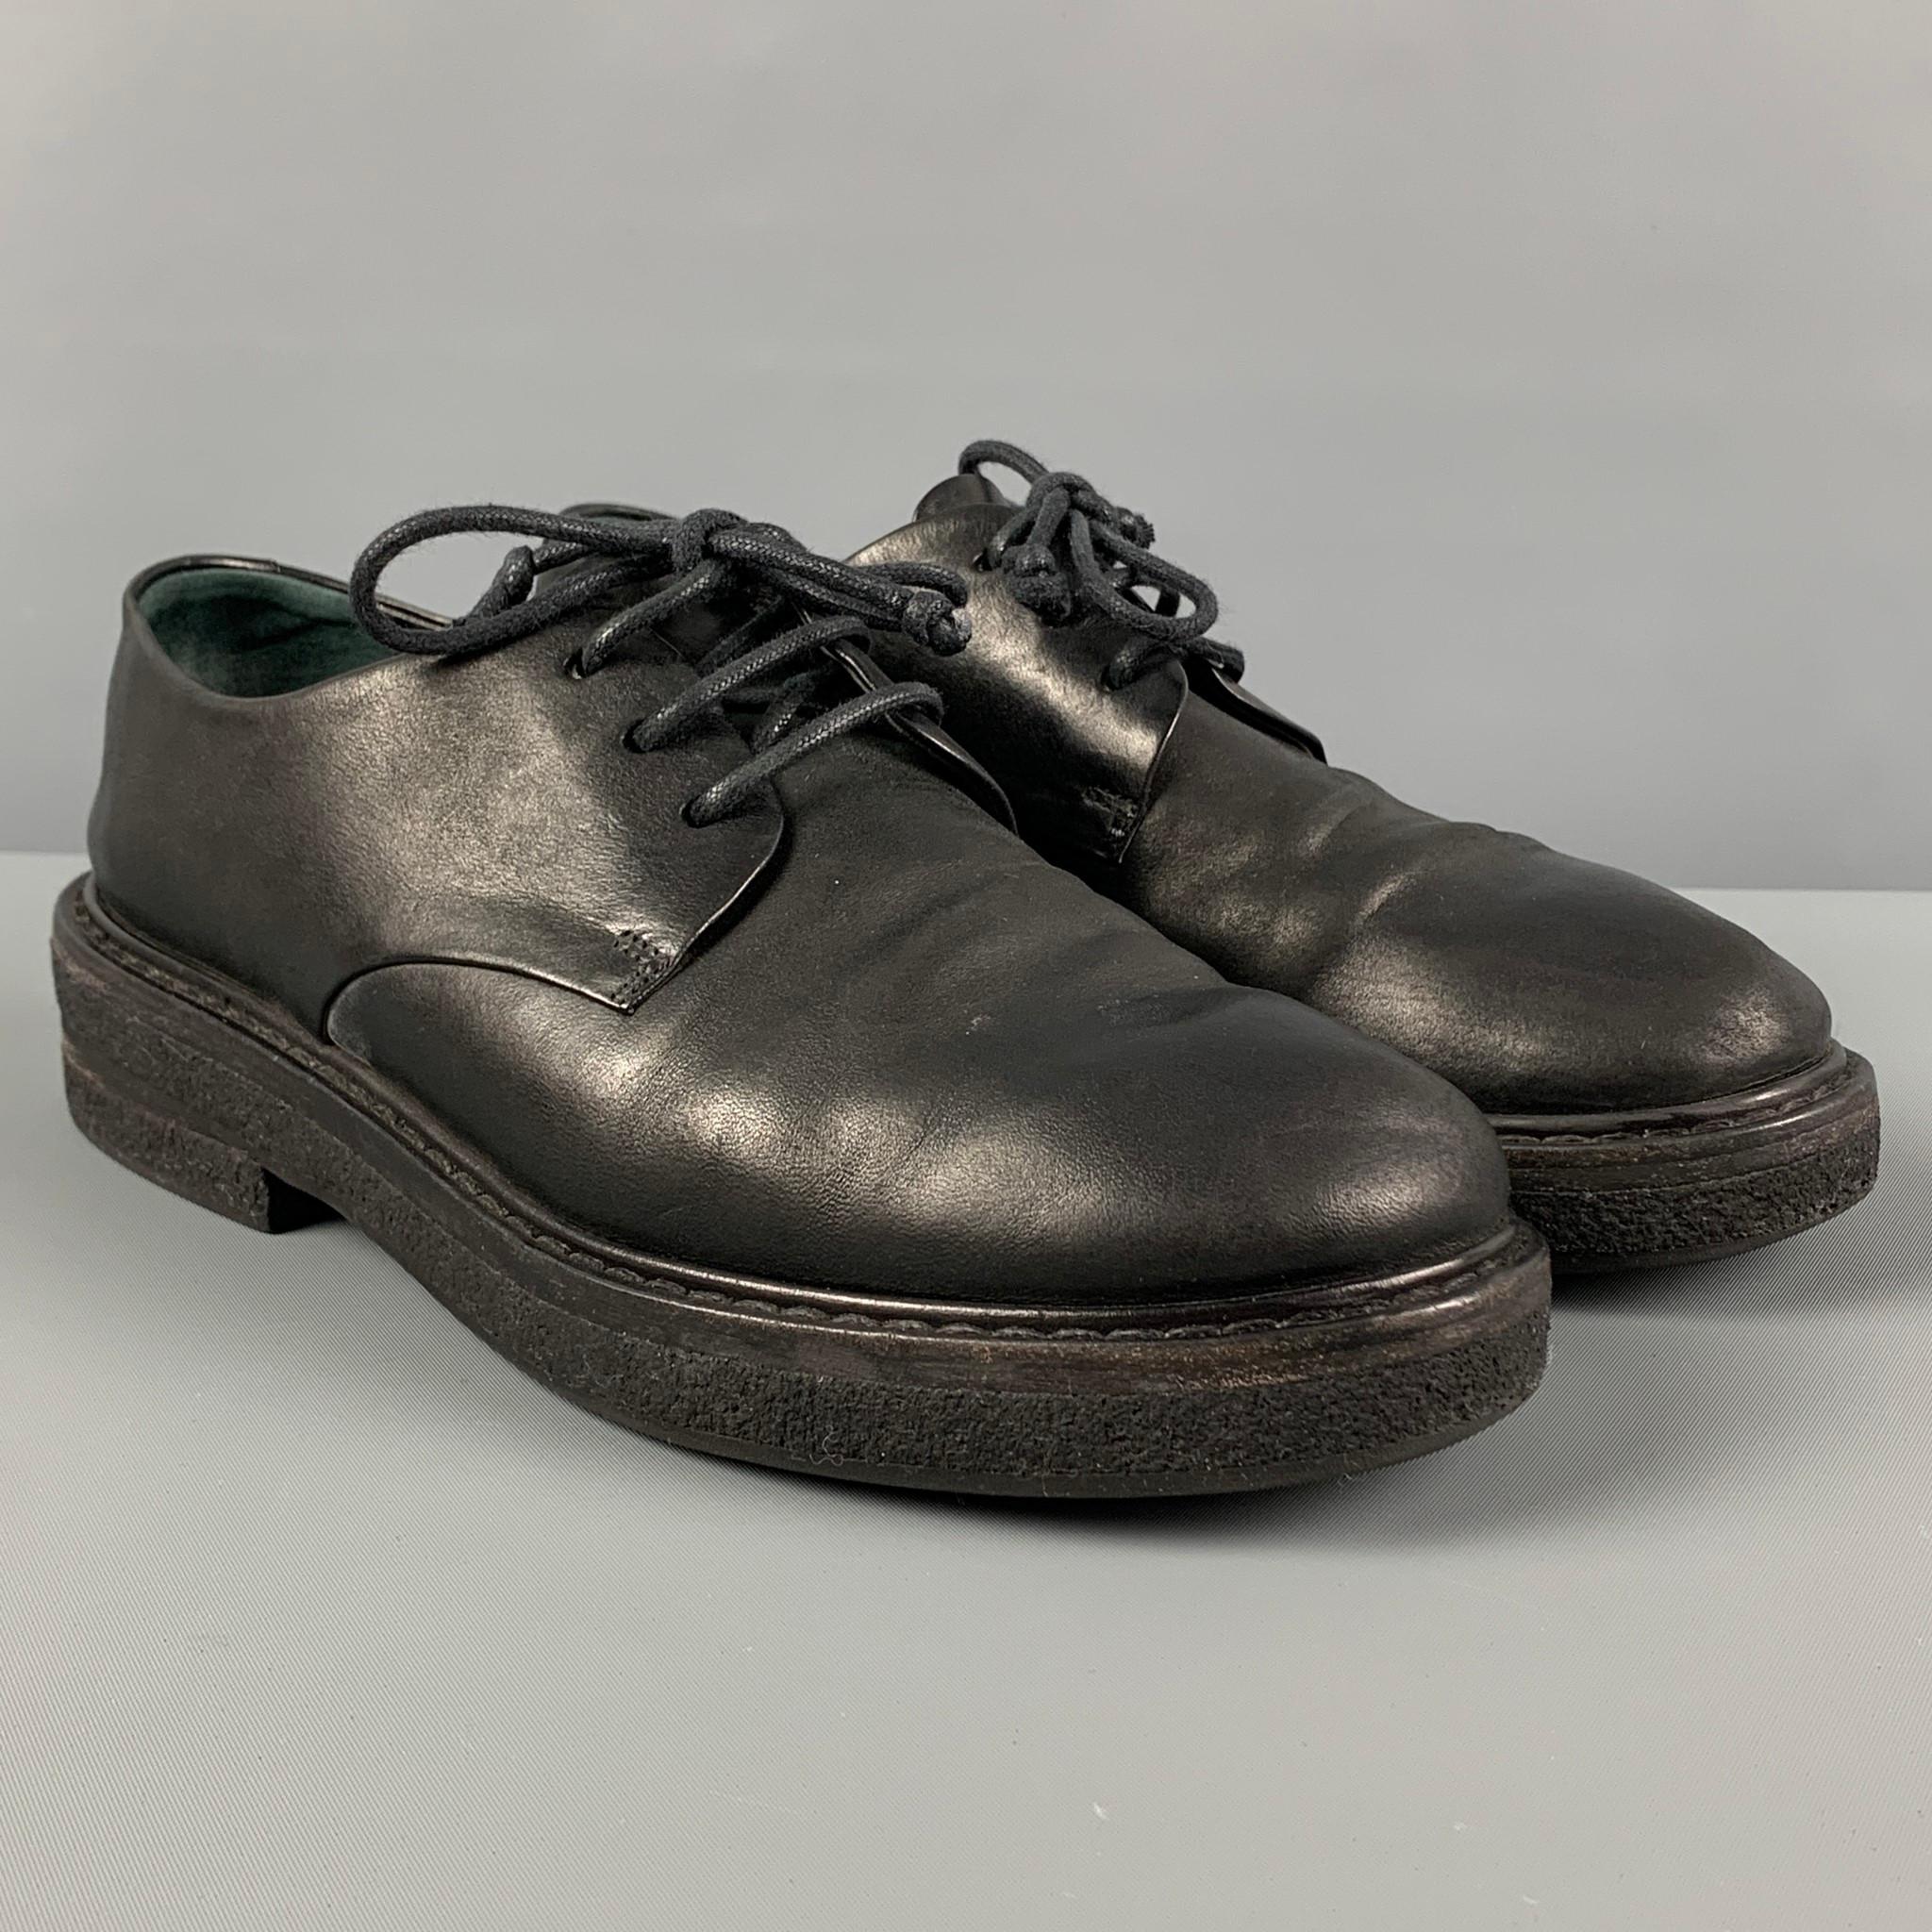 MARSELL shoes comes in a black leather featuring a round toe and a leather lace up closure. Includes box. Made in Italy. 

Very Good Pre-Owned Condition.
Marked: 36

Outsole: 10.5 in. x 4 in